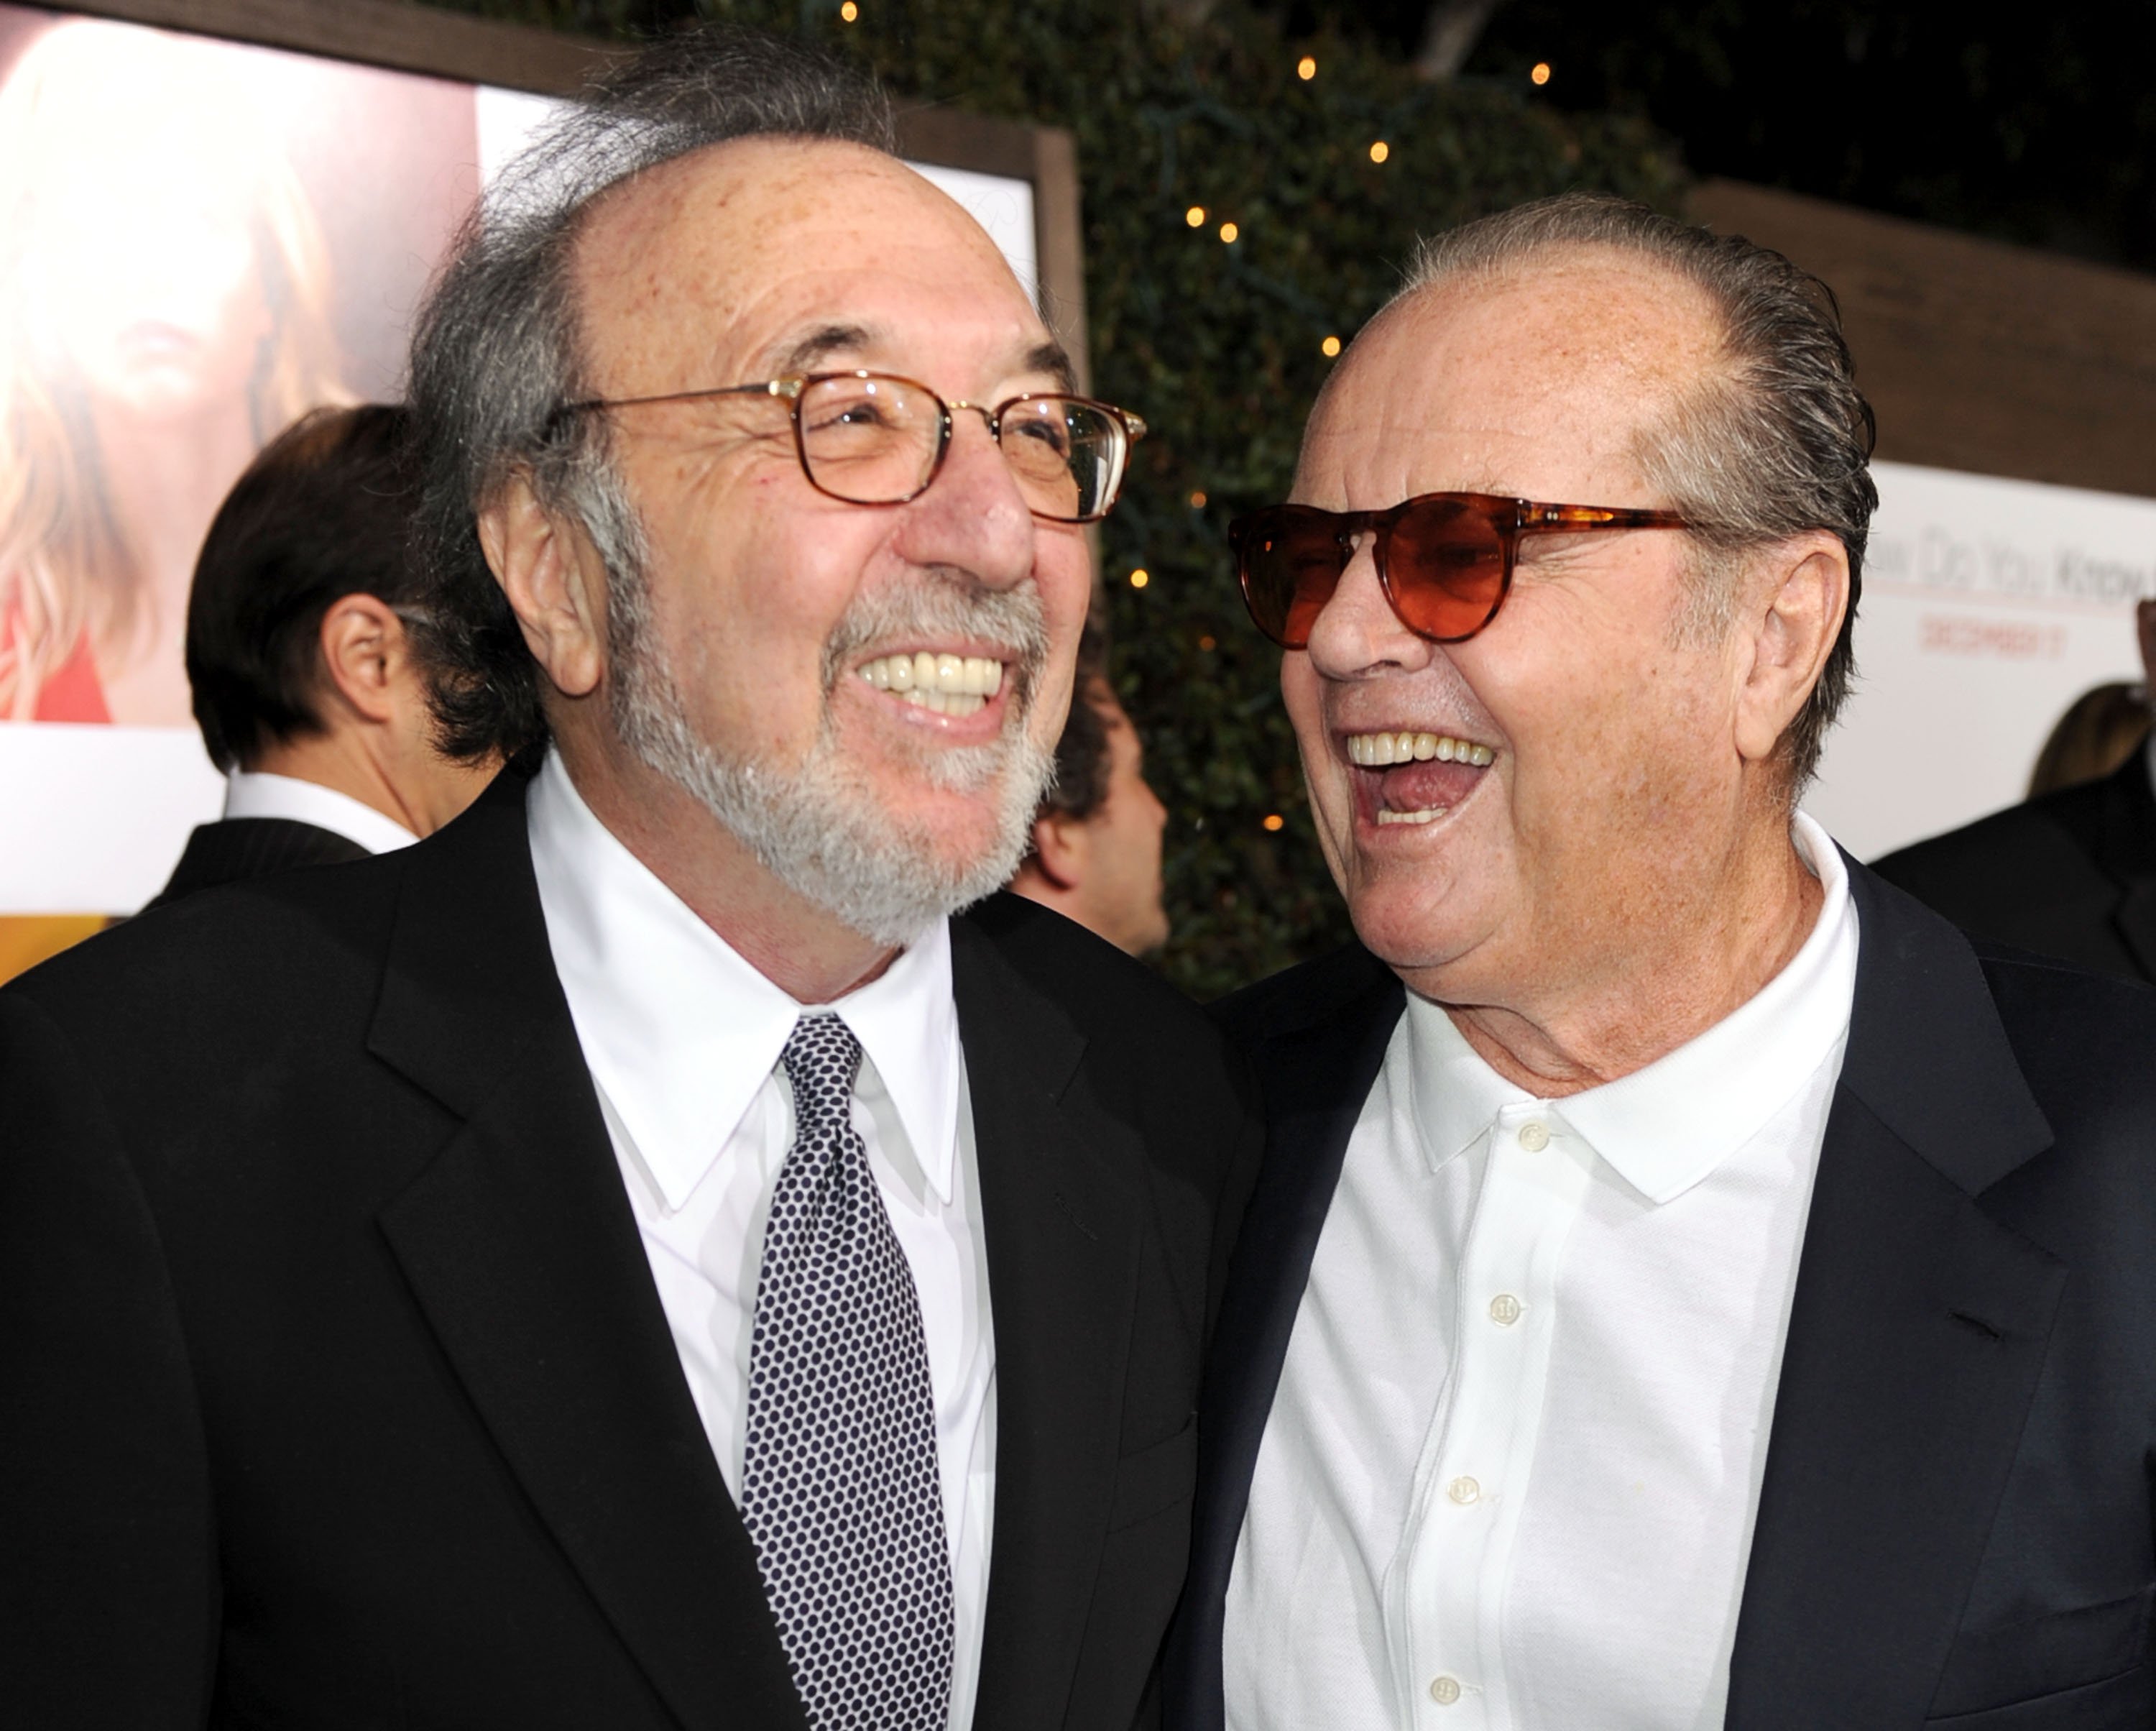 James L. Brooks (L) and Jack Nicholson at the premiere of Columbia Pictures' 'How Do You Know' on December 13, 2010 in Los Angeles, California.